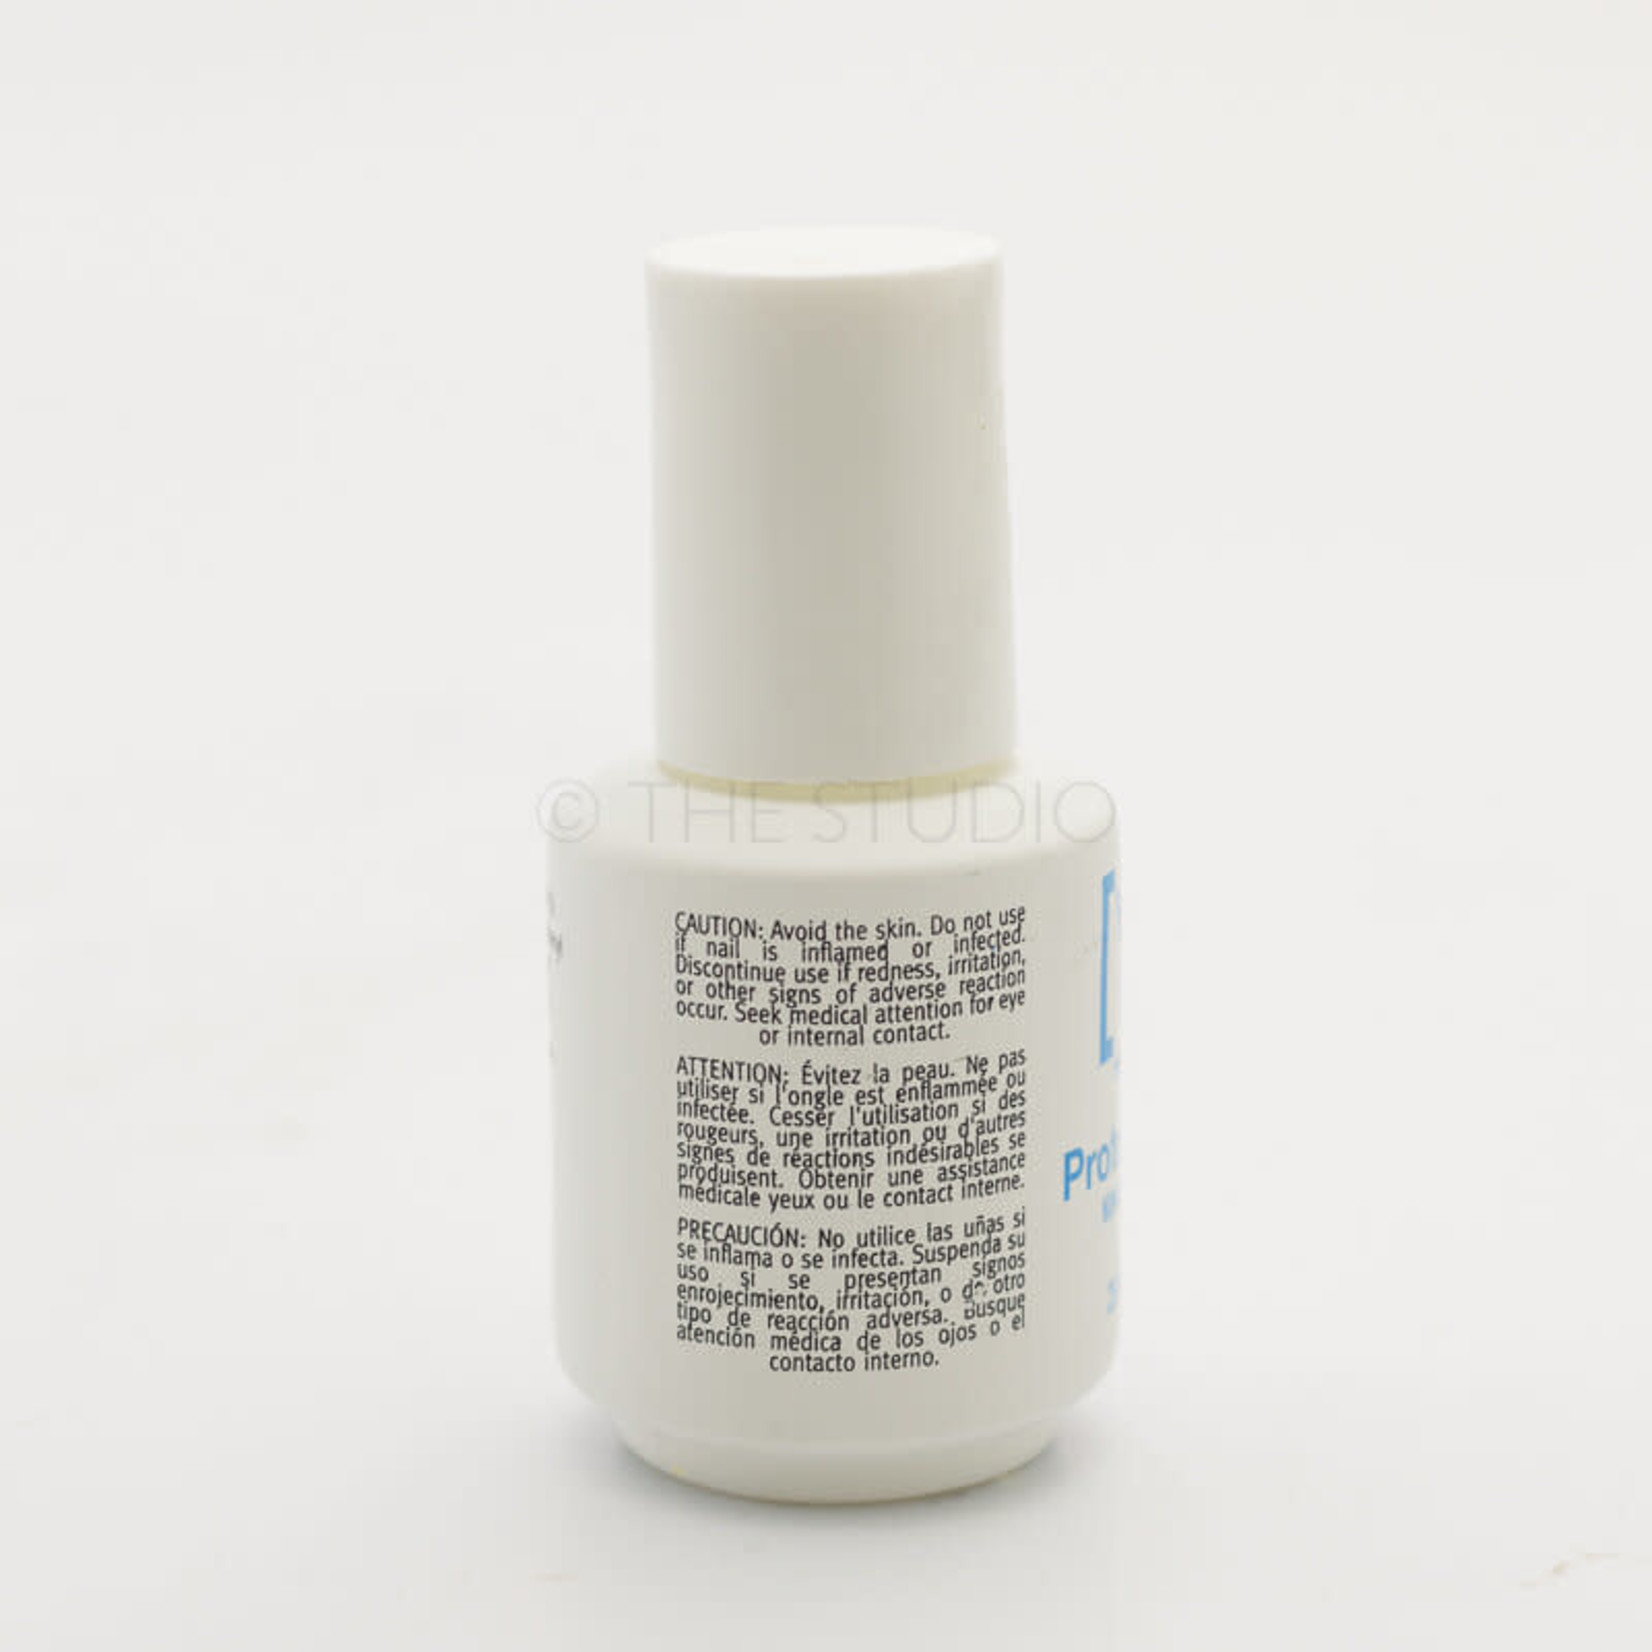 Young Nails Young Nails - Protein Bond - Primer - 0.25 oz